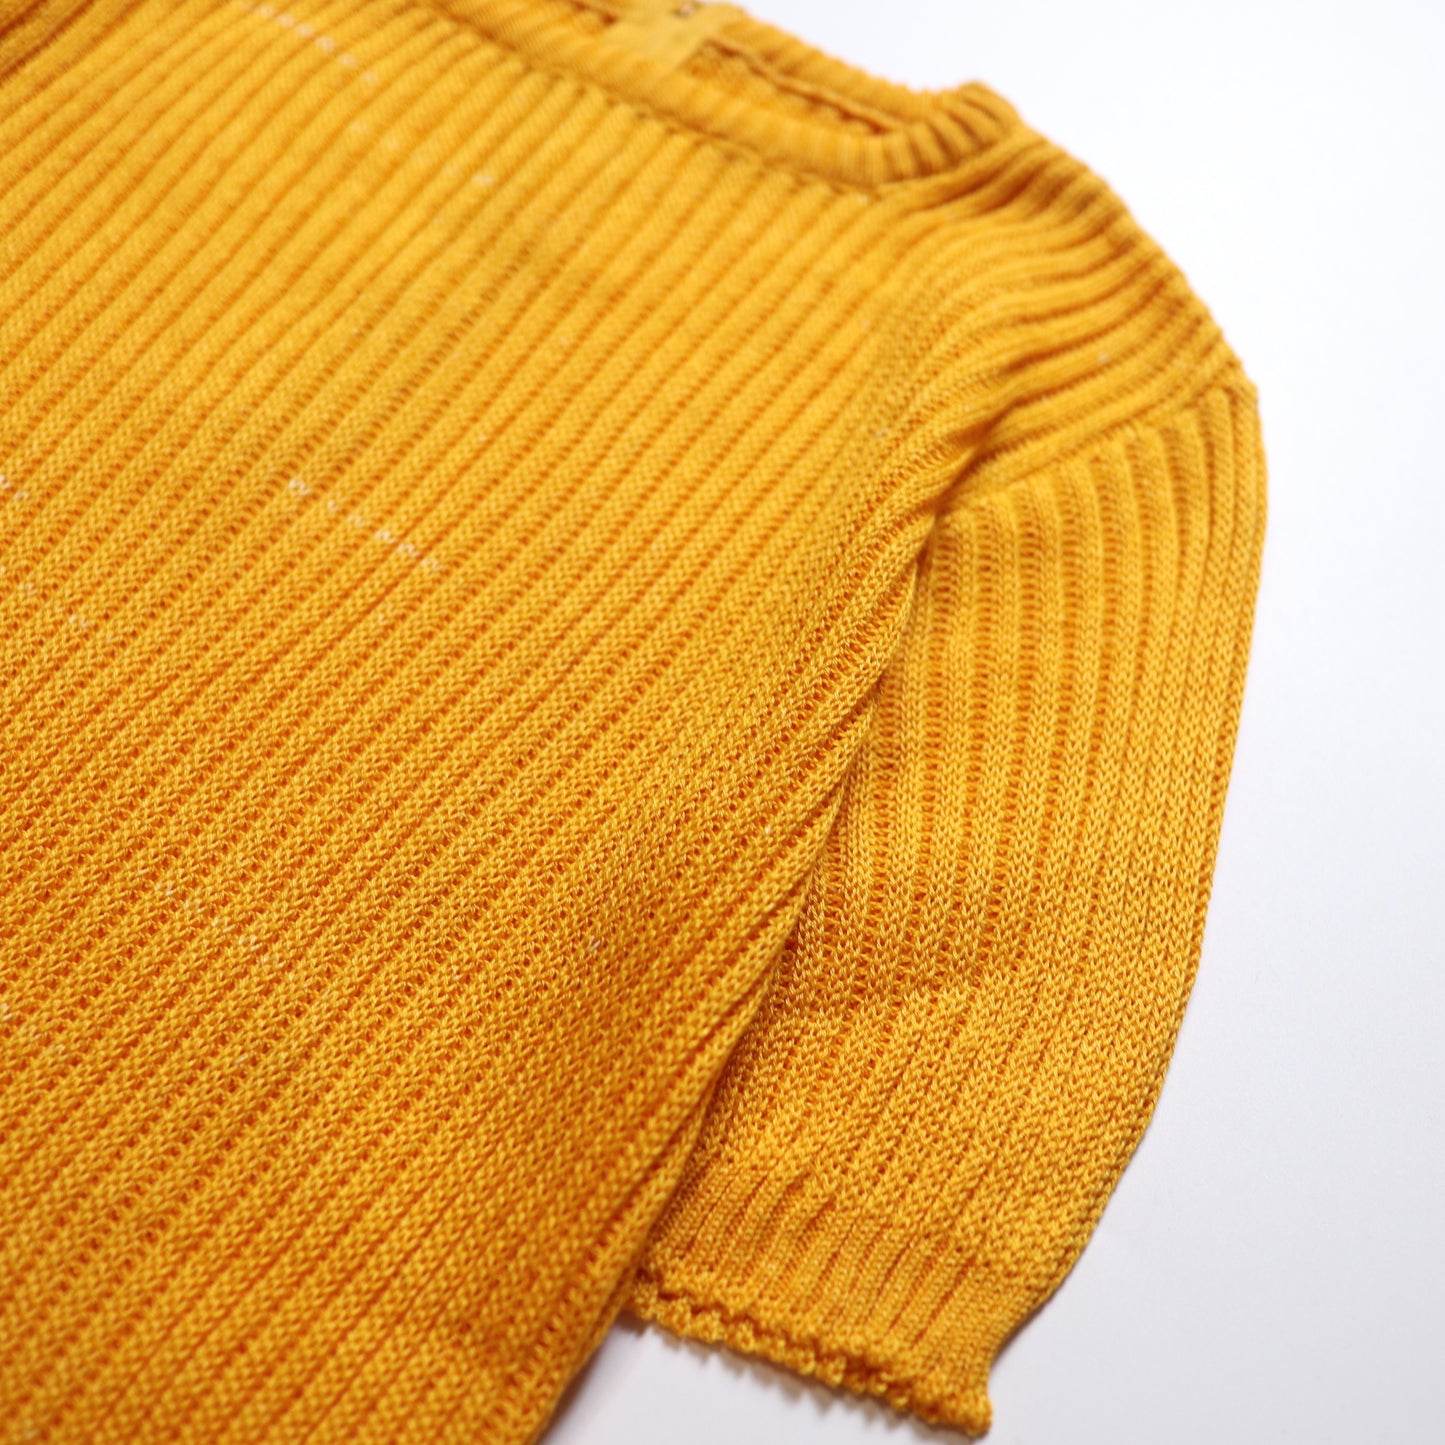 1980s mustard yellow knitted short-sleeved top